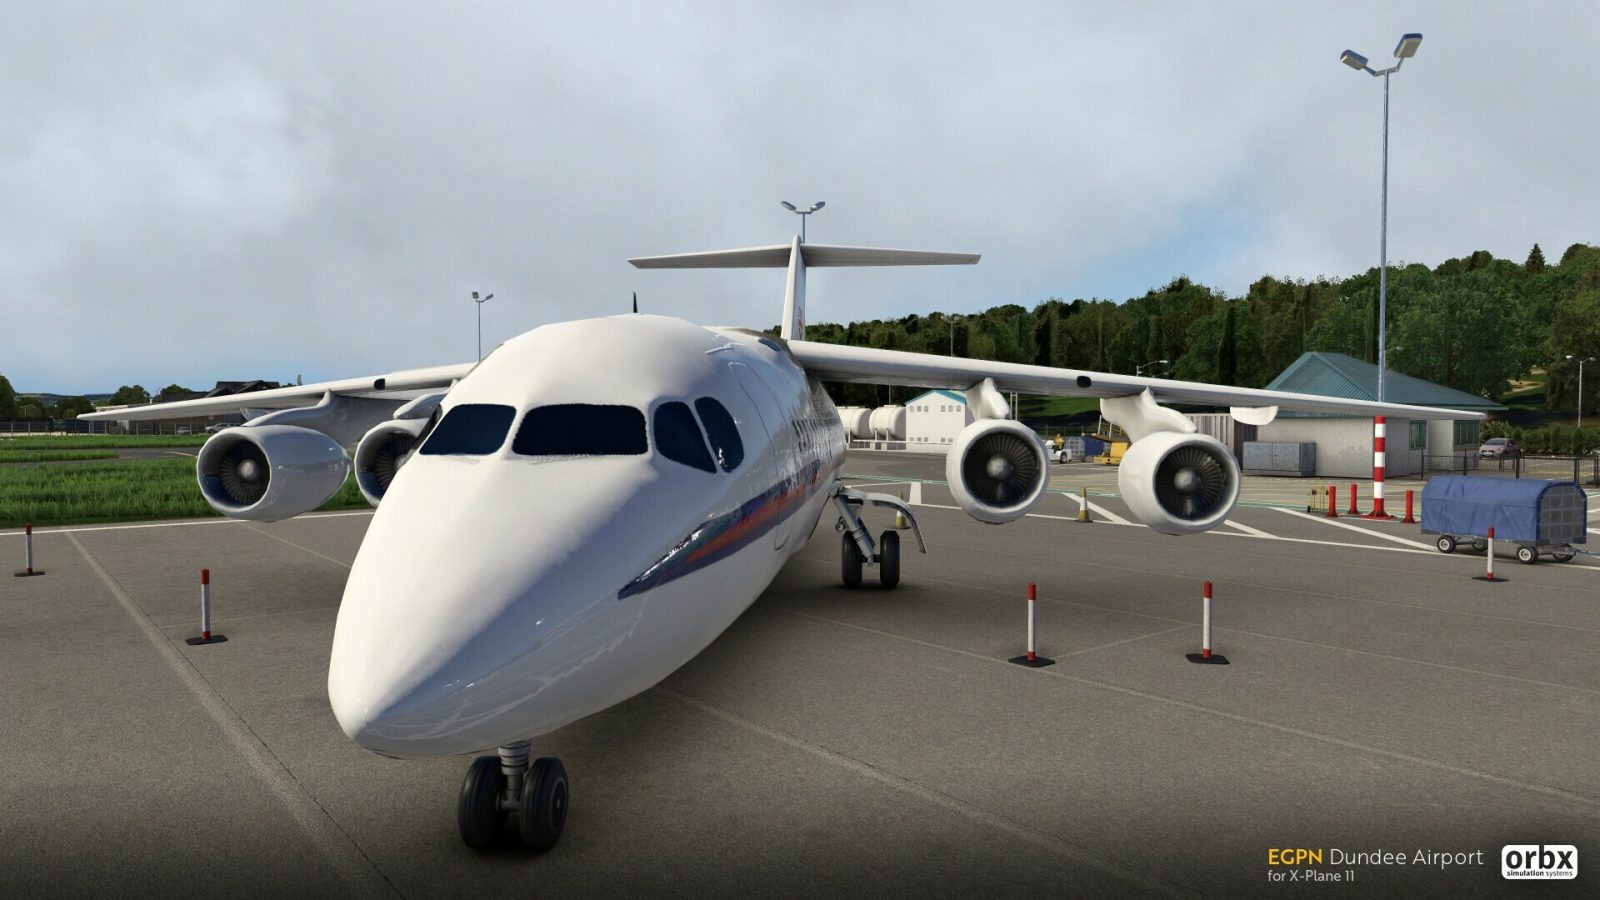 Orbx Dundee Airport-4030 